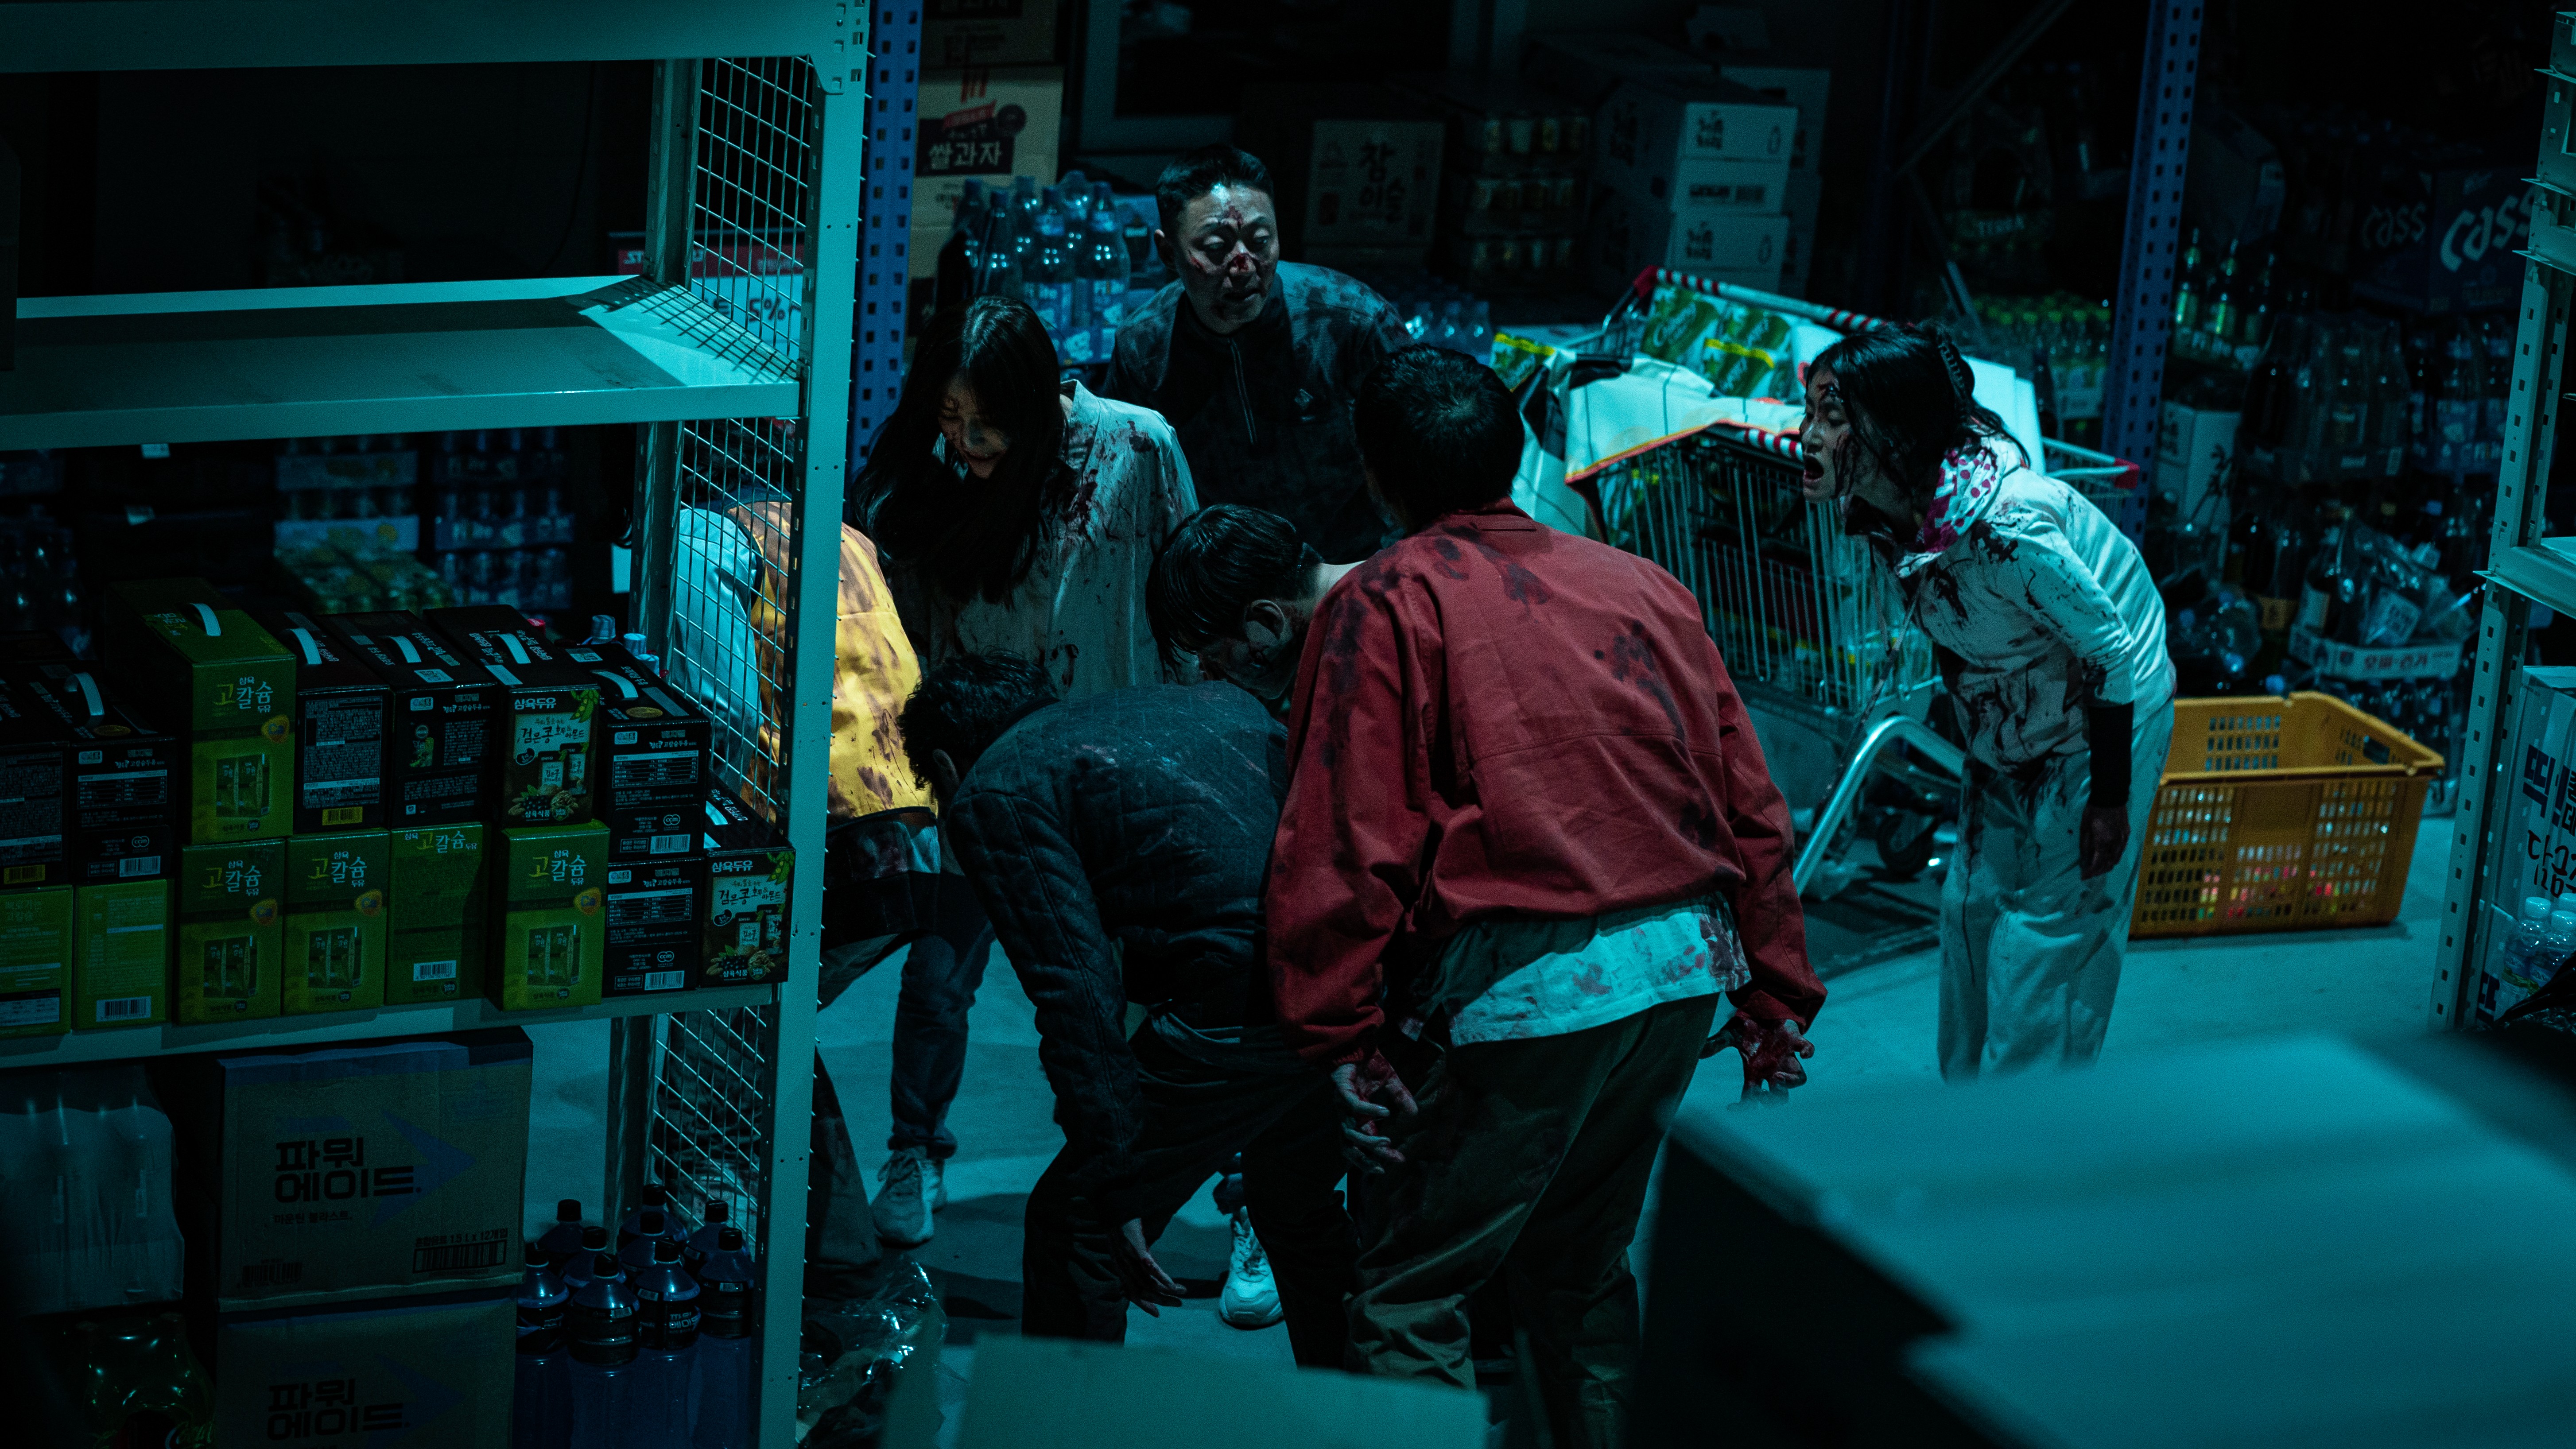 Zombieverse': Netflix Zombie Reality Series Coming in August 2023 - What's  on Netflix